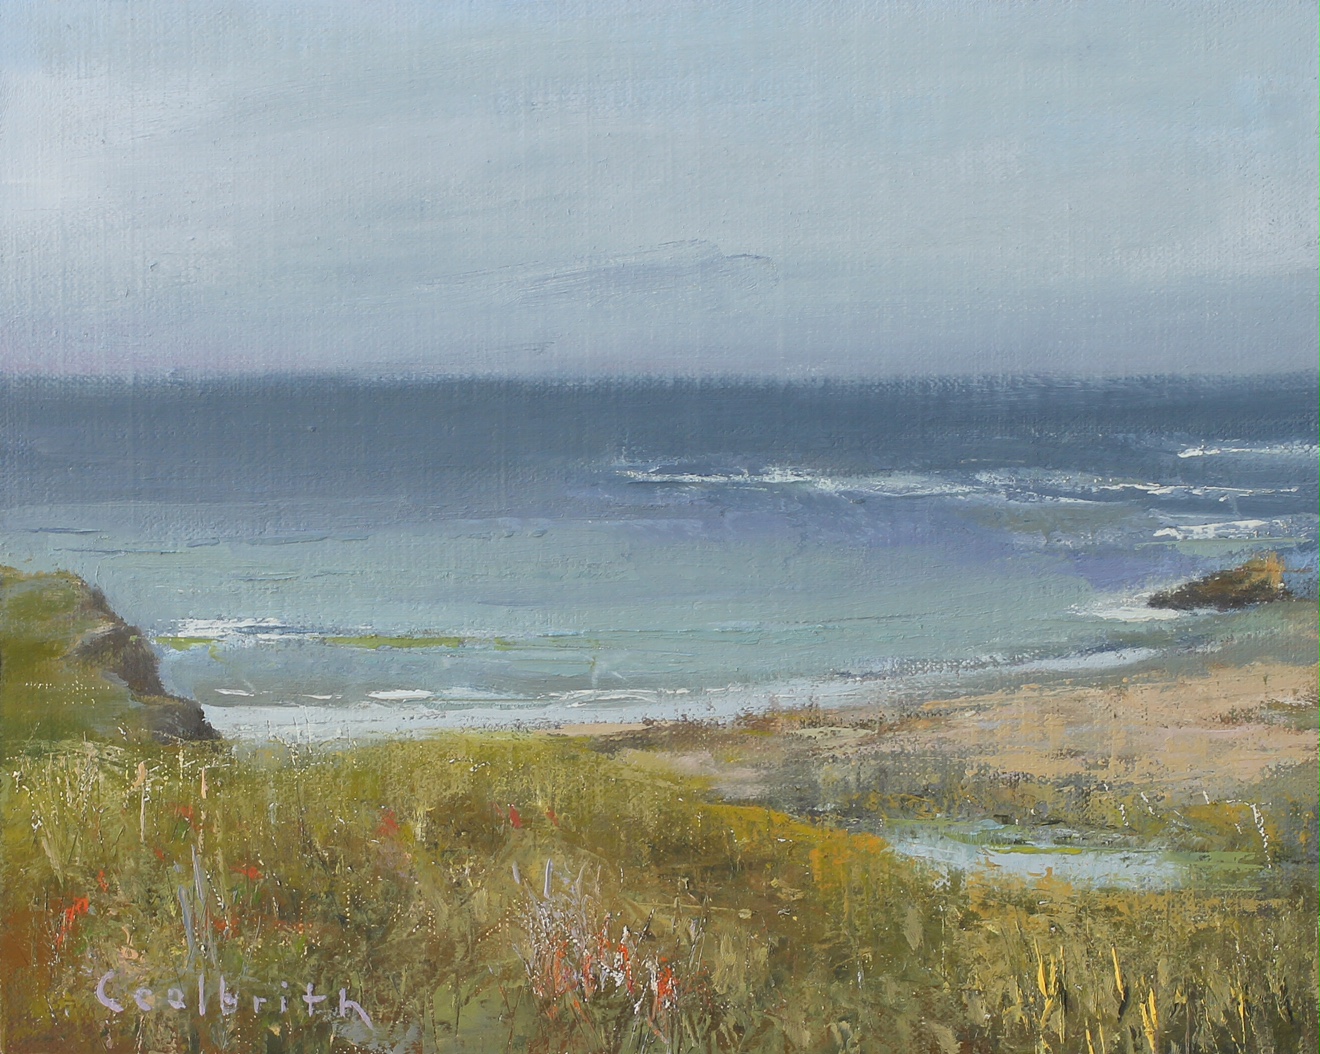 Dan Jones, "Croon Creek Beach," 8 x 10, Oil; part of the Land Conservancy of San Luis Obispo County and SLOPE (San Luis Outdoor Painters for the Environment), Colors of Conservation exhibit